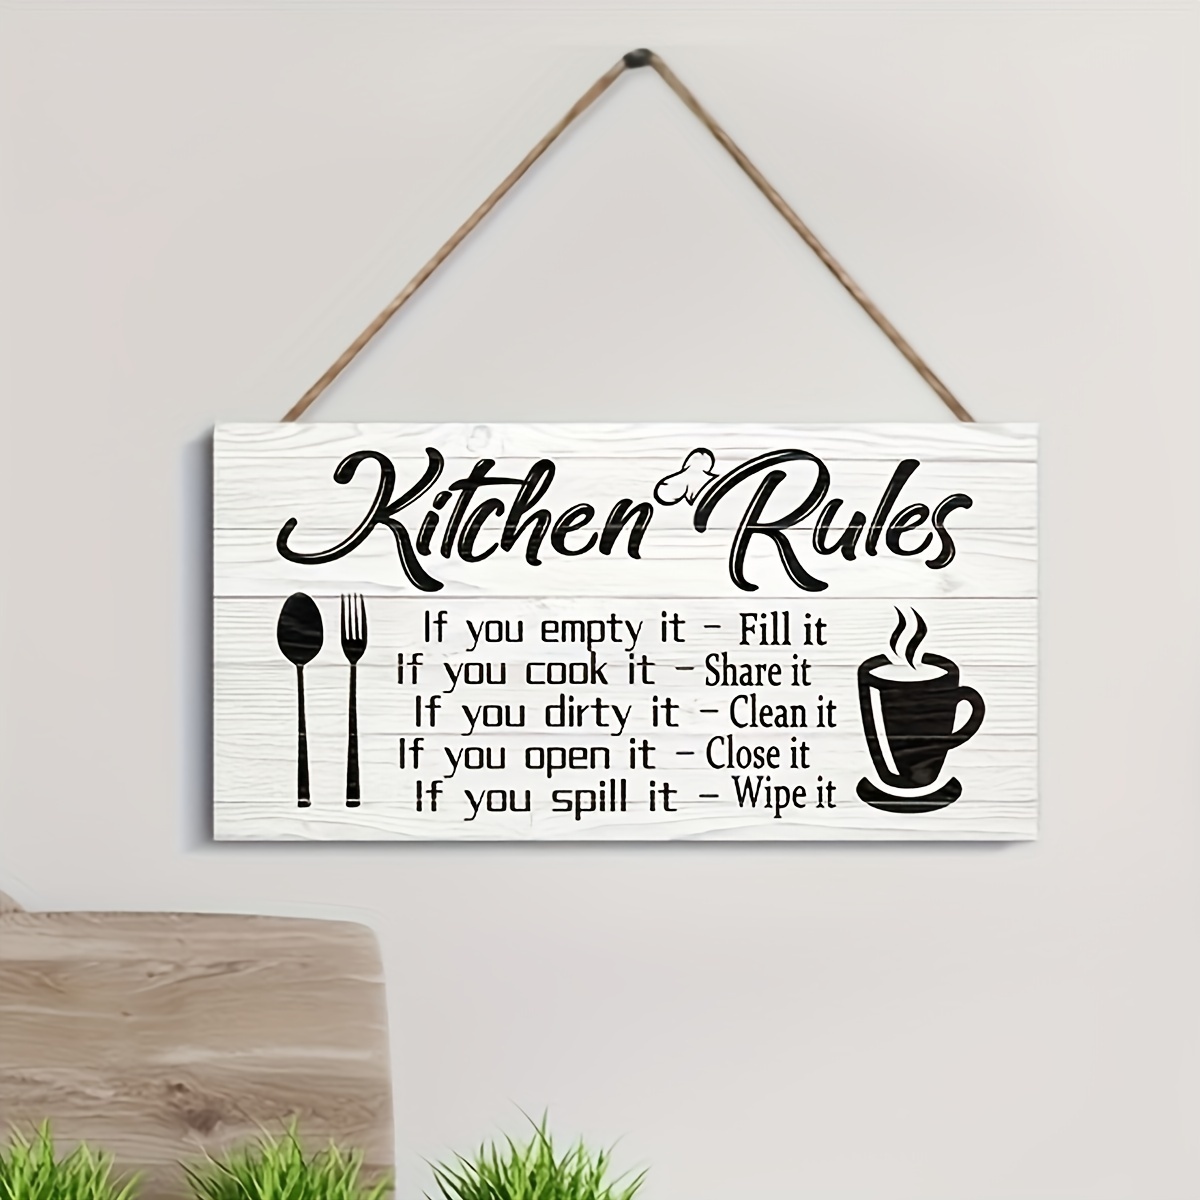 office kitchen signs  funny humor etiquette